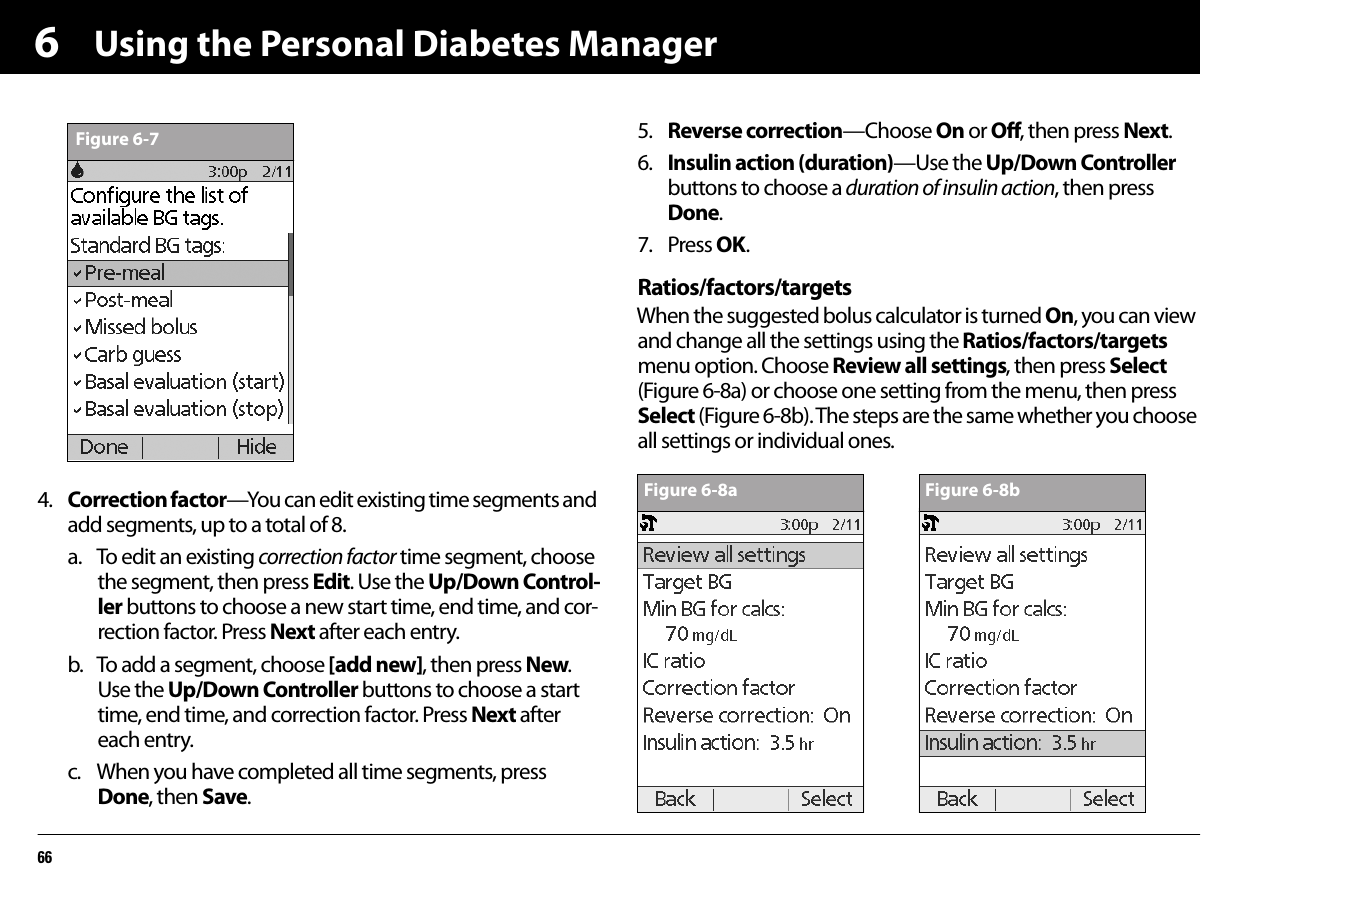 Using the Personal Diabetes Manager6664. Correction factor—You can edit existing time segments and add segments, up to a total of 8.a. To edit an existing correction factor time segment, choose the segment, then press Edit. Use the Up/Down Control-ler buttons to choose a new start time, end time, and cor-rection factor. Press Next after each entry. b. To add a segment, choose [add new], then press New. Use the Up/Down Controller buttons to choose a start time, end time, and correction factor. Press Next after each entry.c. When you have completed all time segments, press Done, then Save.5. Reverse correction—Choose On or Off, then press Next.6. Insulin action (duration)—Use the Up/Down Controller buttons to choose a duration of insulin action, then press Done.7. Press OK.Ratios/factors/targetsWhen the suggested bolus calculator is turned On, you can view and change all the settings using the Ratios/factors/targets menu option. Choose Review all settings, then press Select (Figure 6-8a) or choose one setting from the menu, then press Select (Figure 6-8b). The steps are the same whether you choose all settings or individual ones.Figure 6-7Figure 6-8a Figure 6-8b